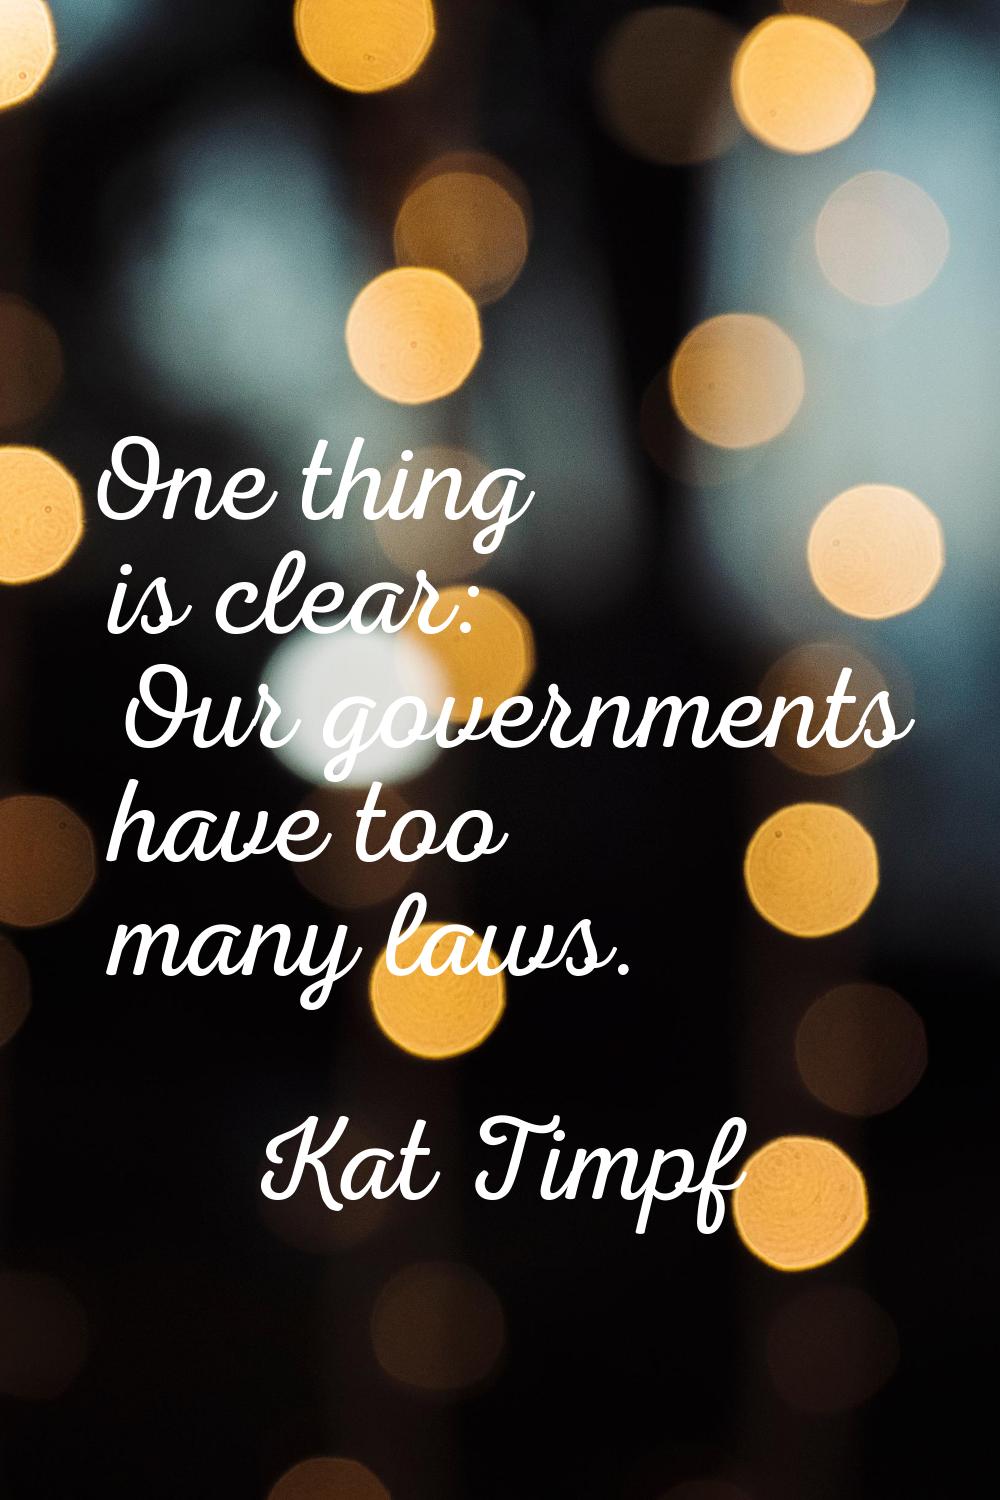 One thing is clear: Our governments have too many laws.